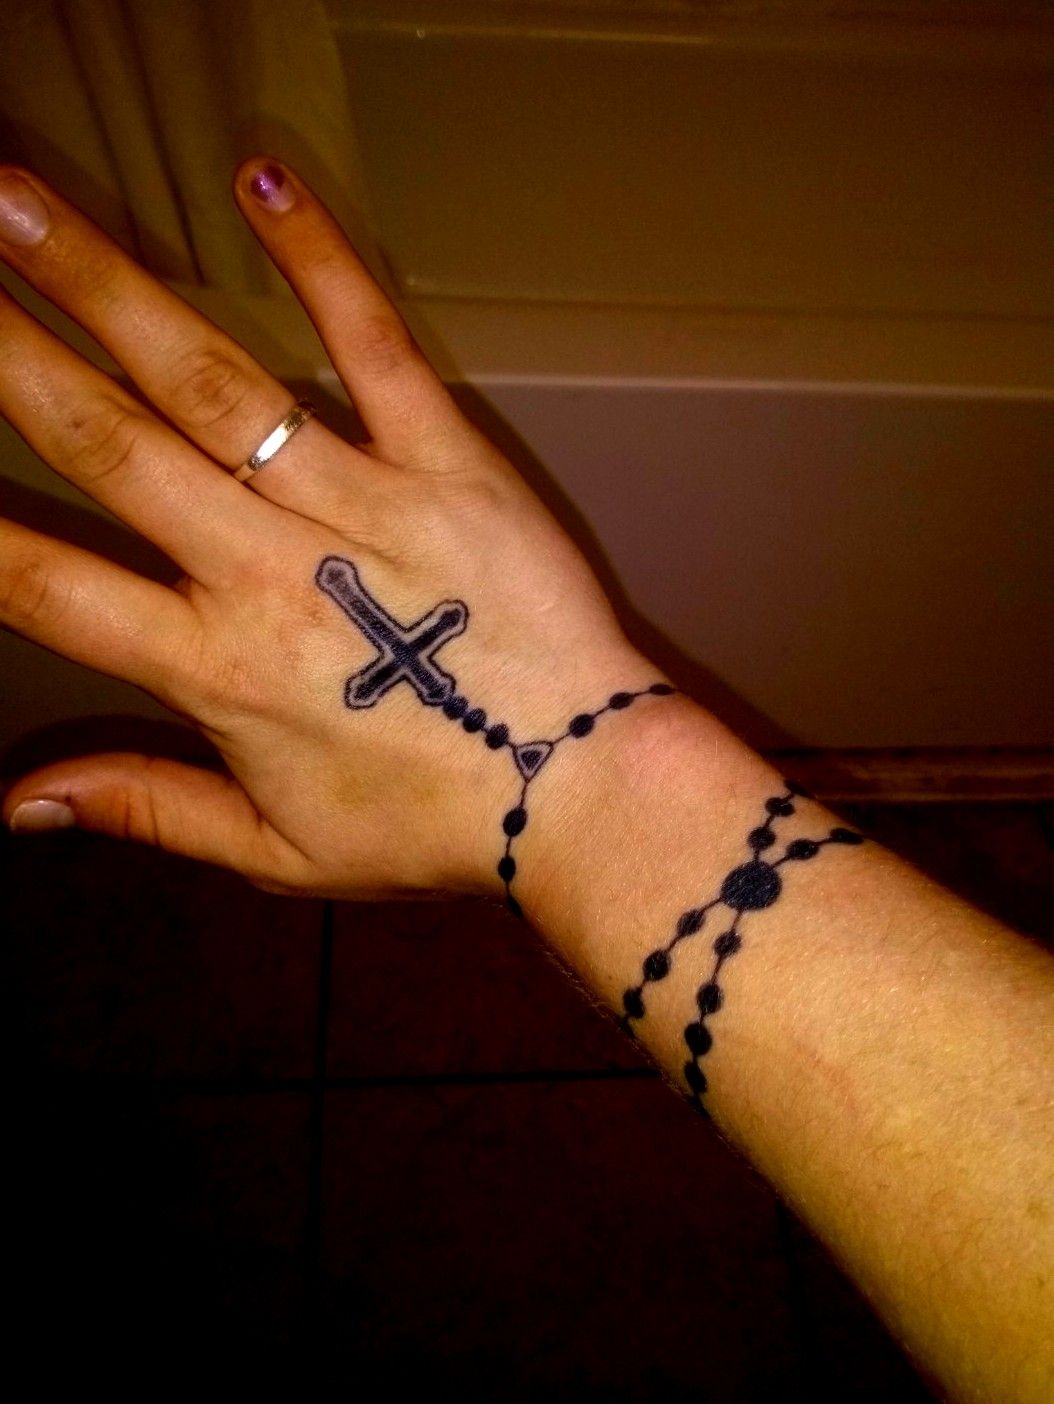 Had a blast with these rosary beads and crucifix tattooed tattooparlor  tattoolover tattoolife in  Wrist tattoos for women Rosary bead tattoo  Rosary tattoo